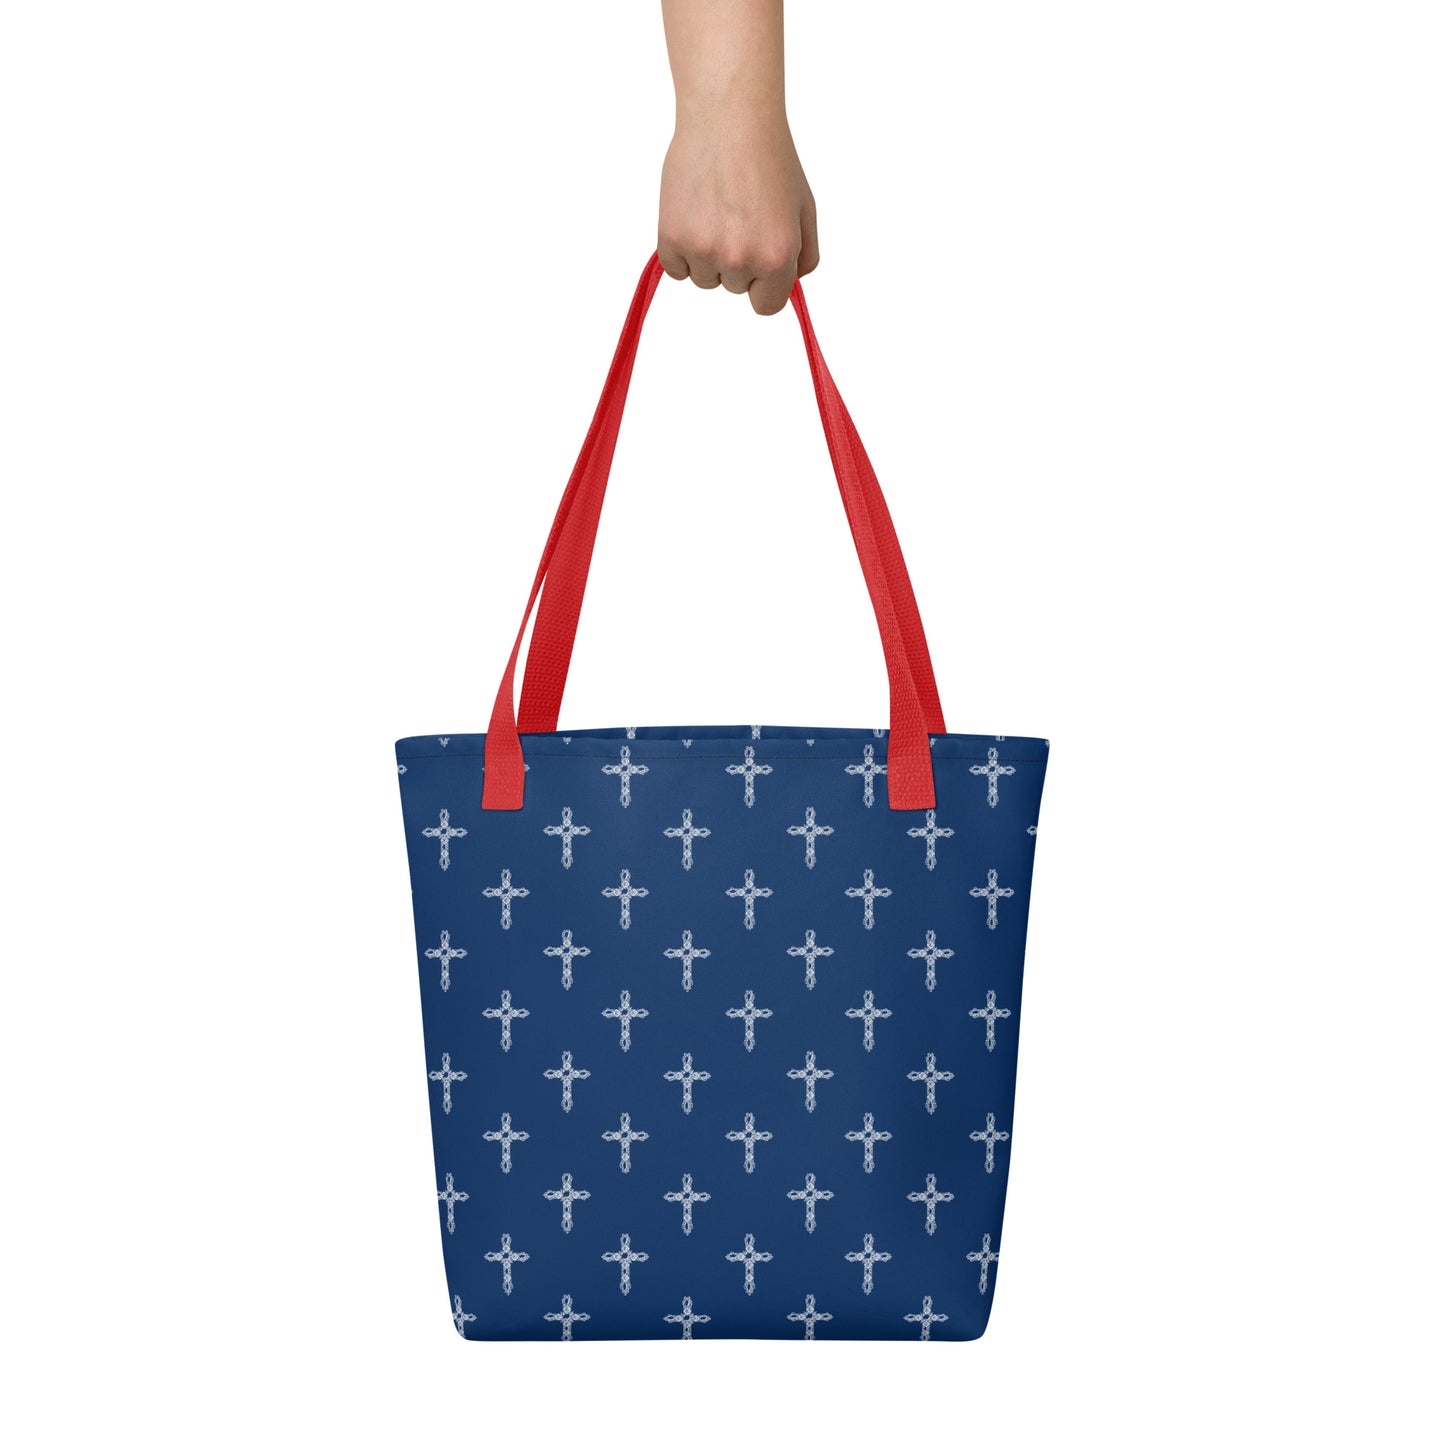 A woman's hand holds the red straps of a navy blue purse or bag that has a pattern of ornate white crosses on it, all against a solid white background.